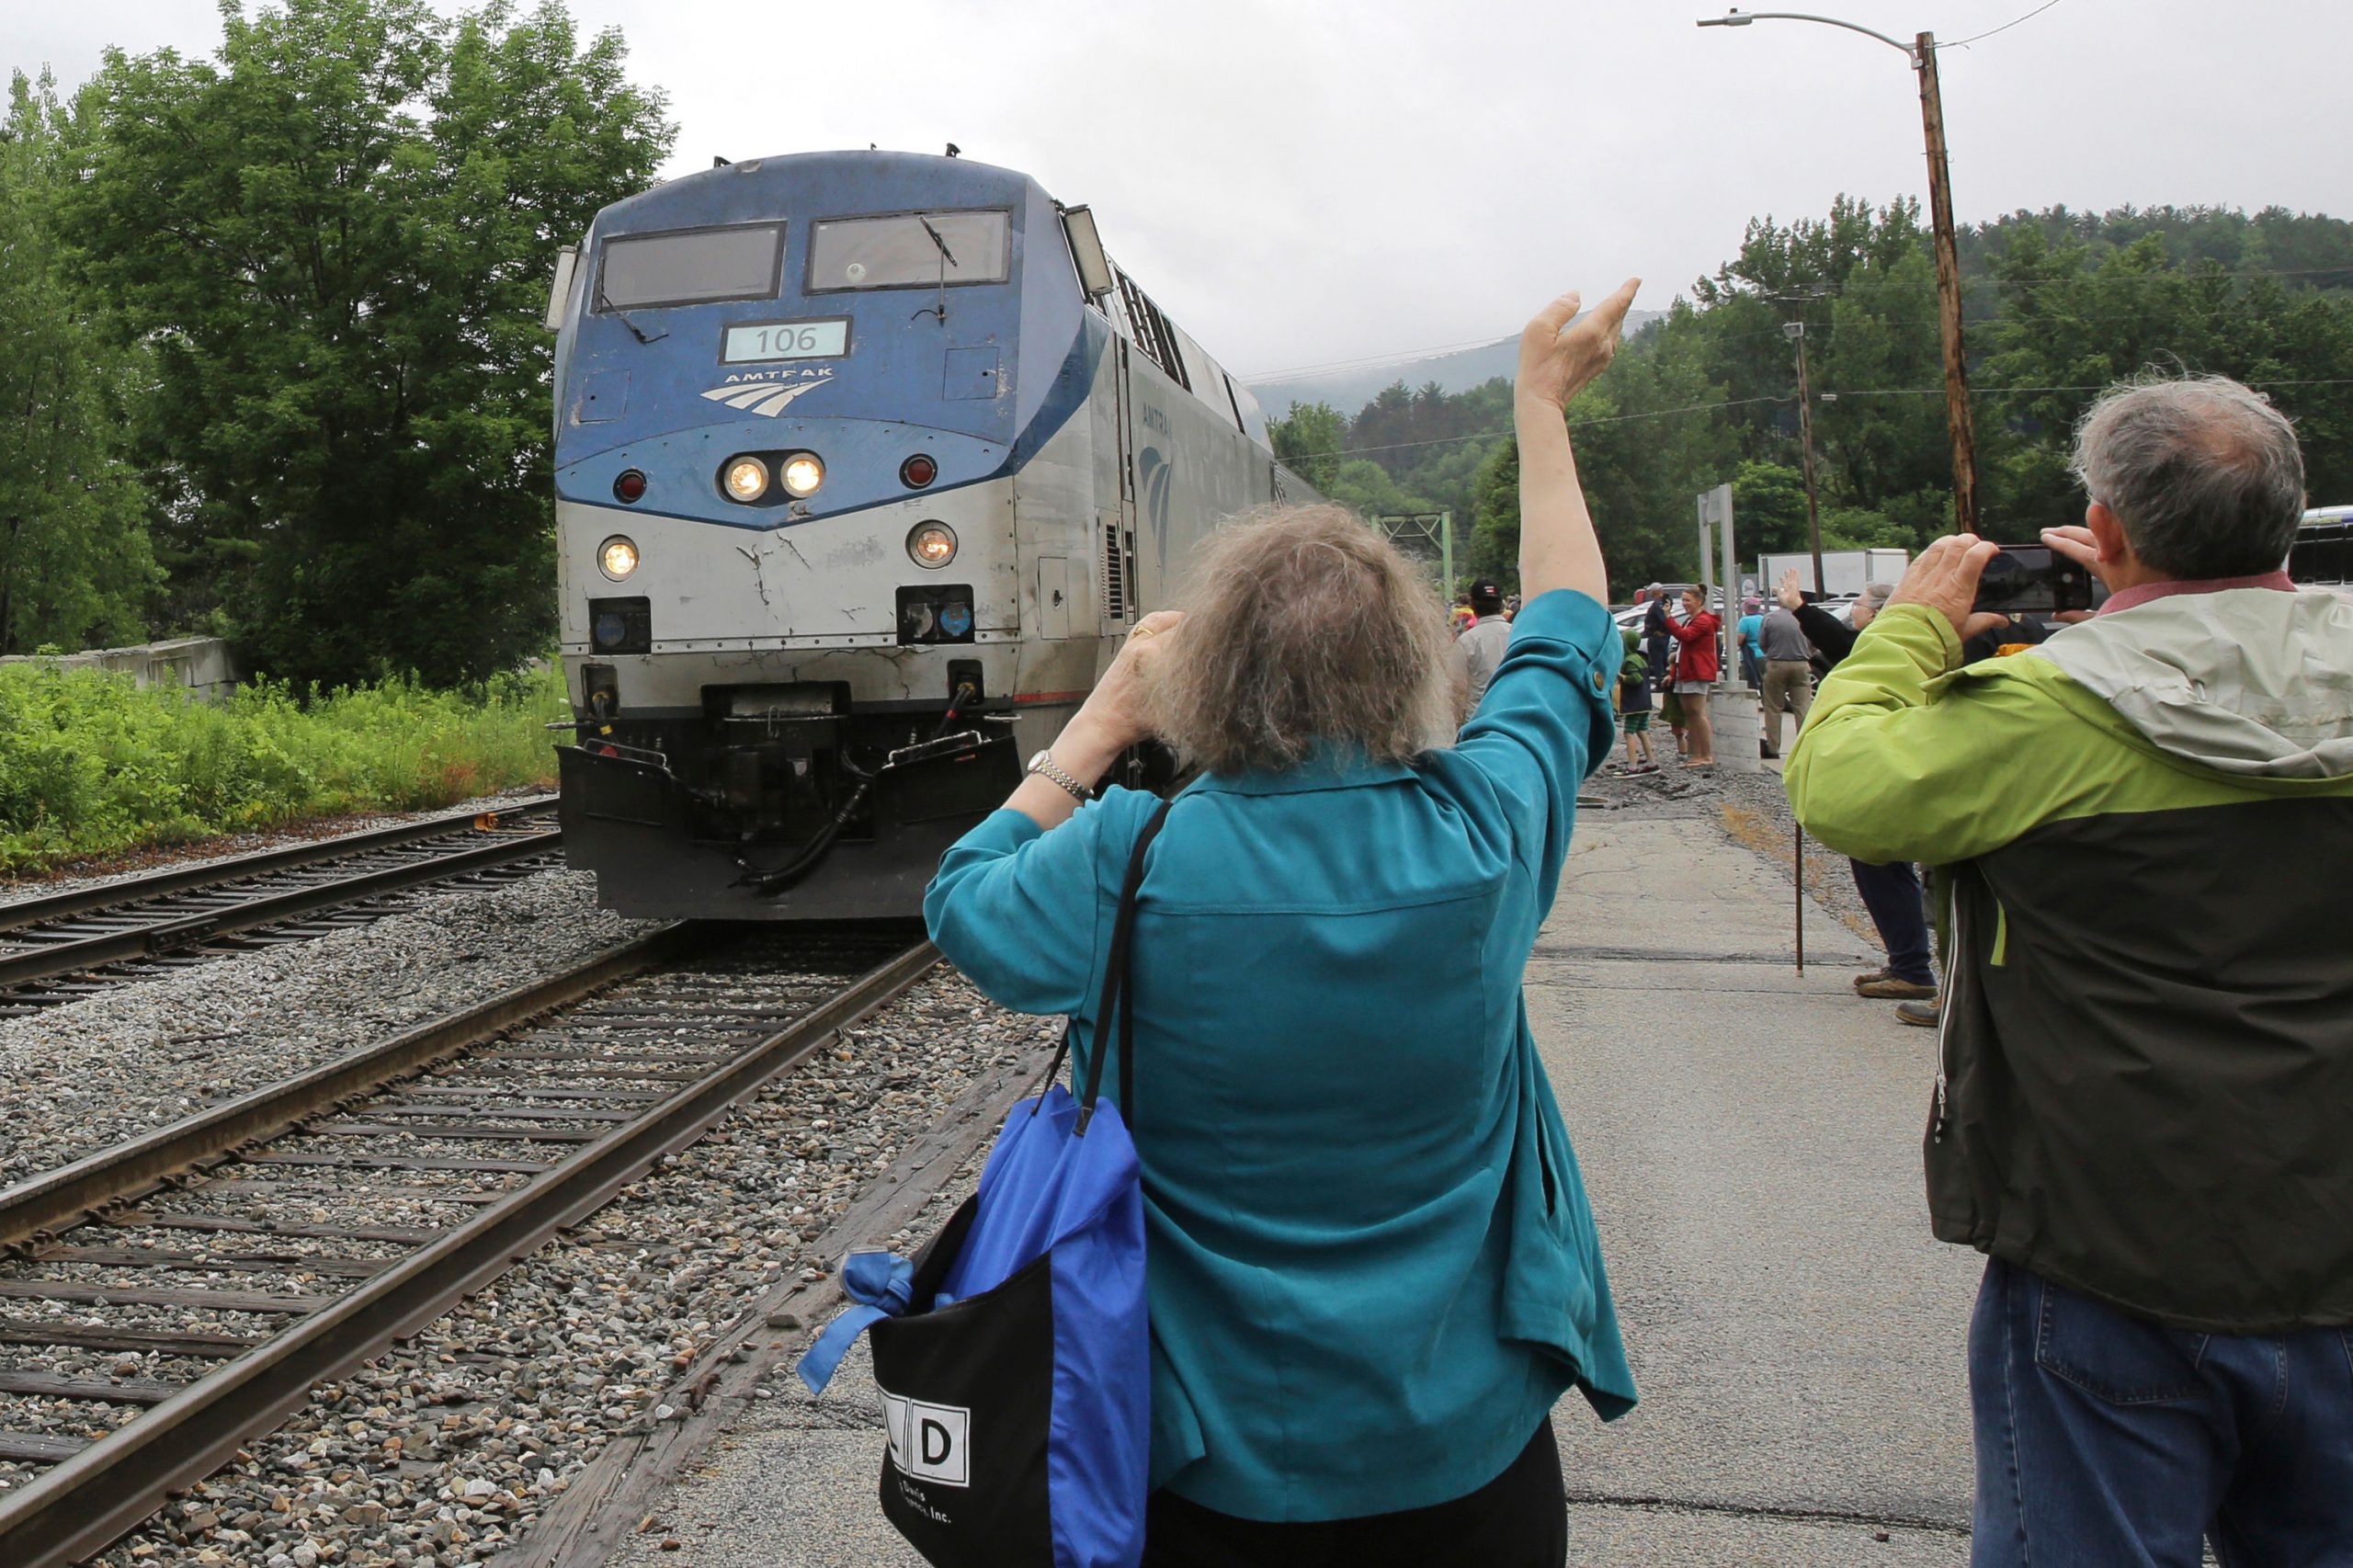 Montana derailment: Other Amtrak train accidents in the past